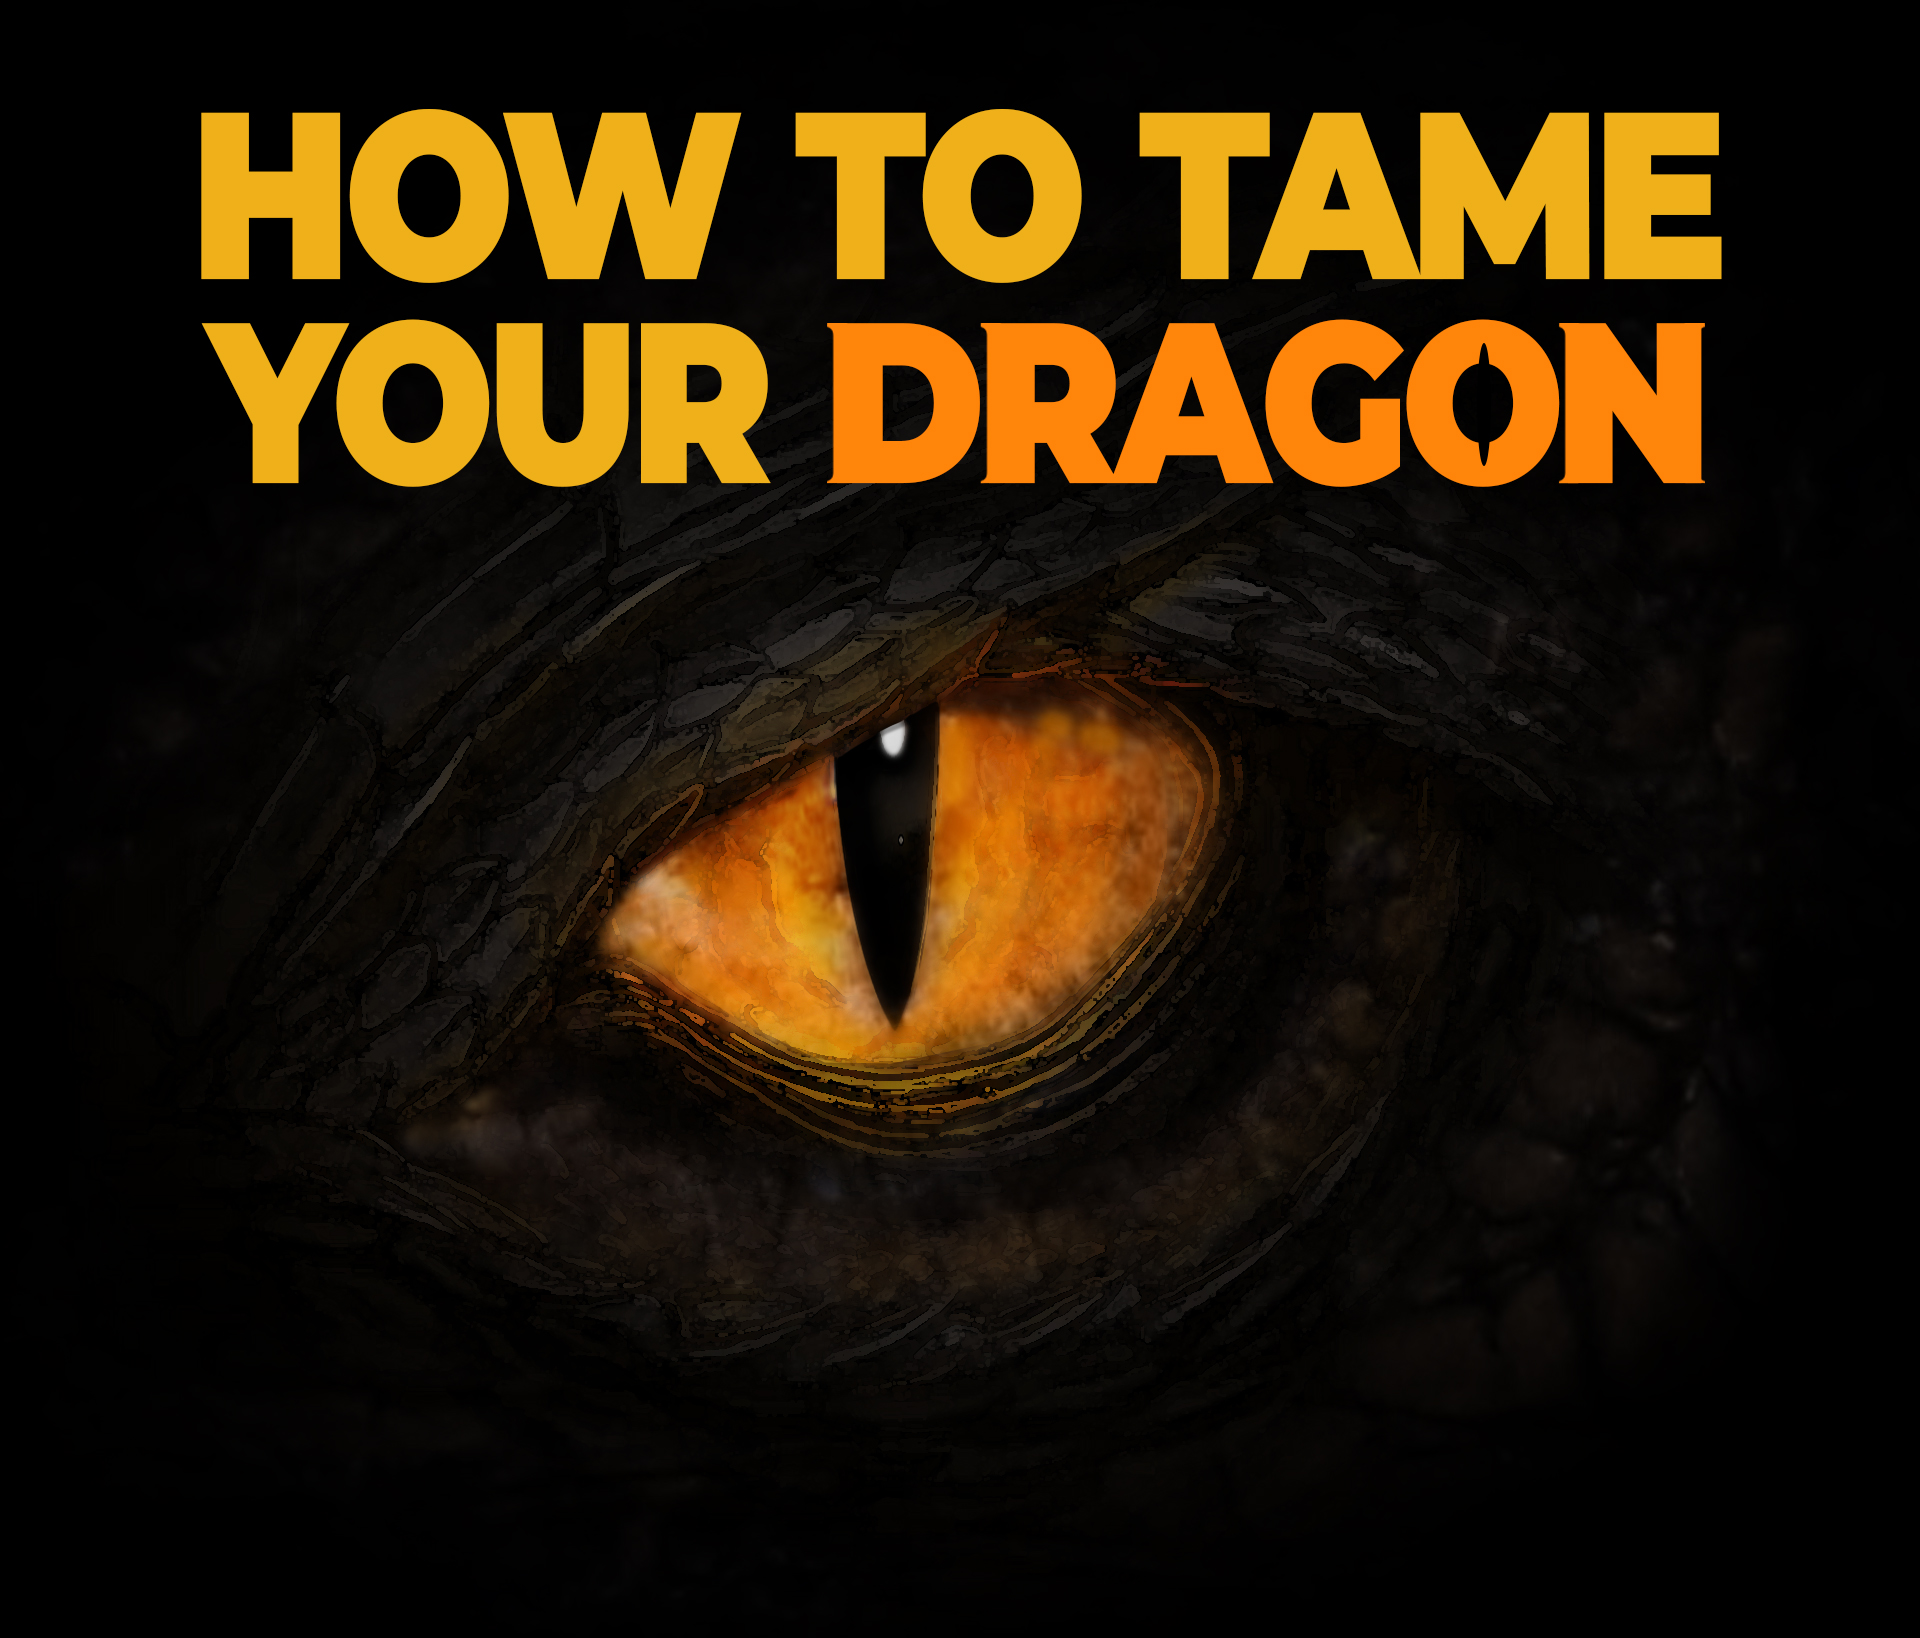 How to Tame your Dragon